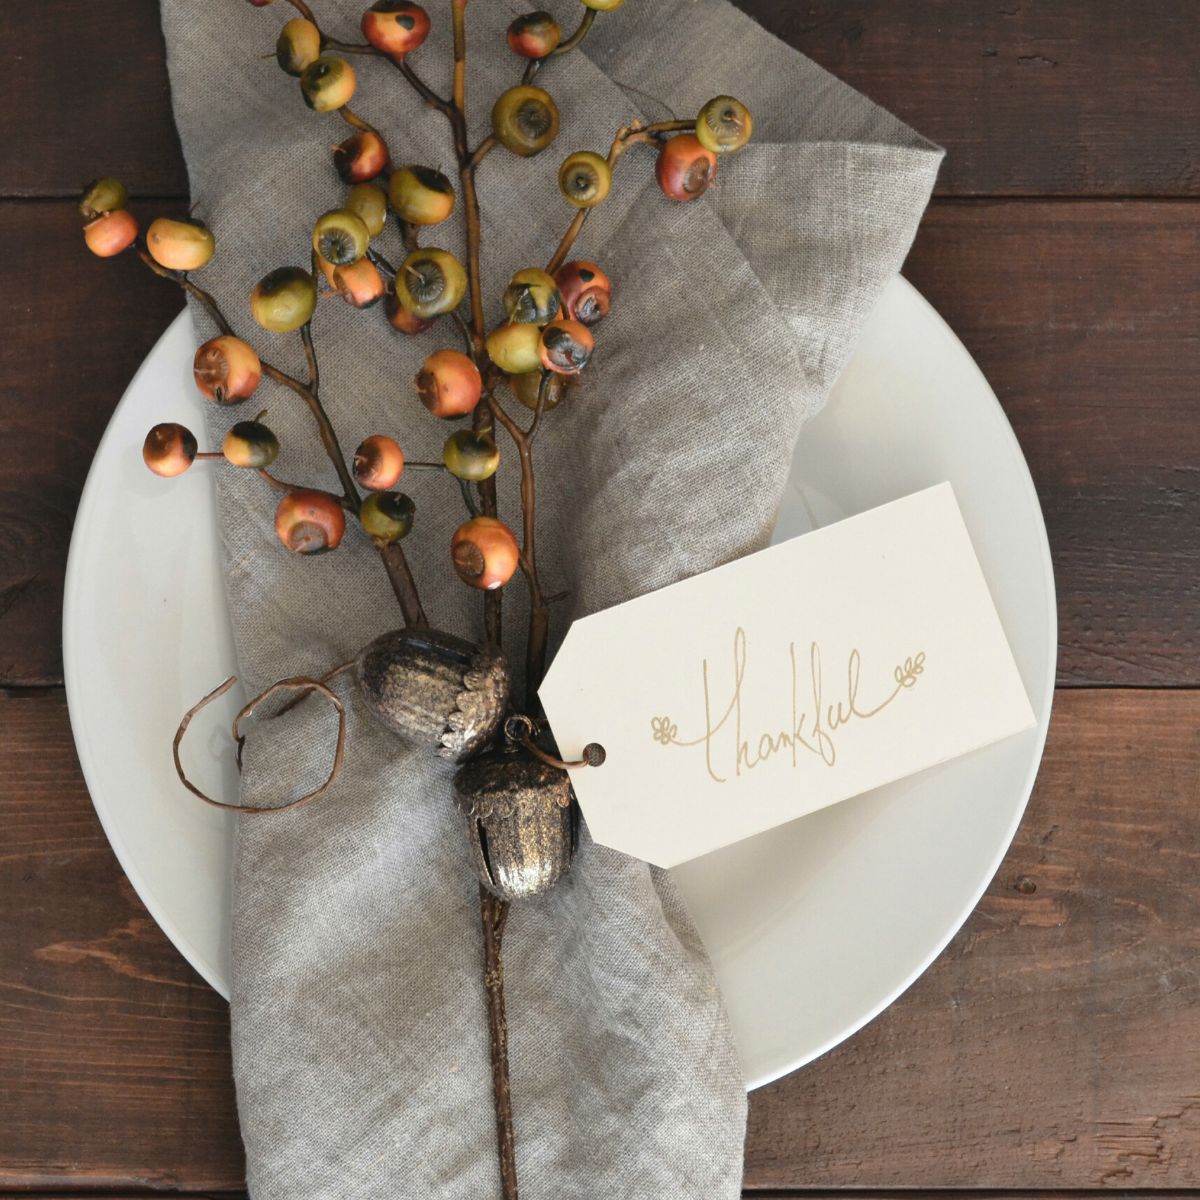 A white plate has a grey napkin and a sprig of orange berries with a tag that says "Thankful."